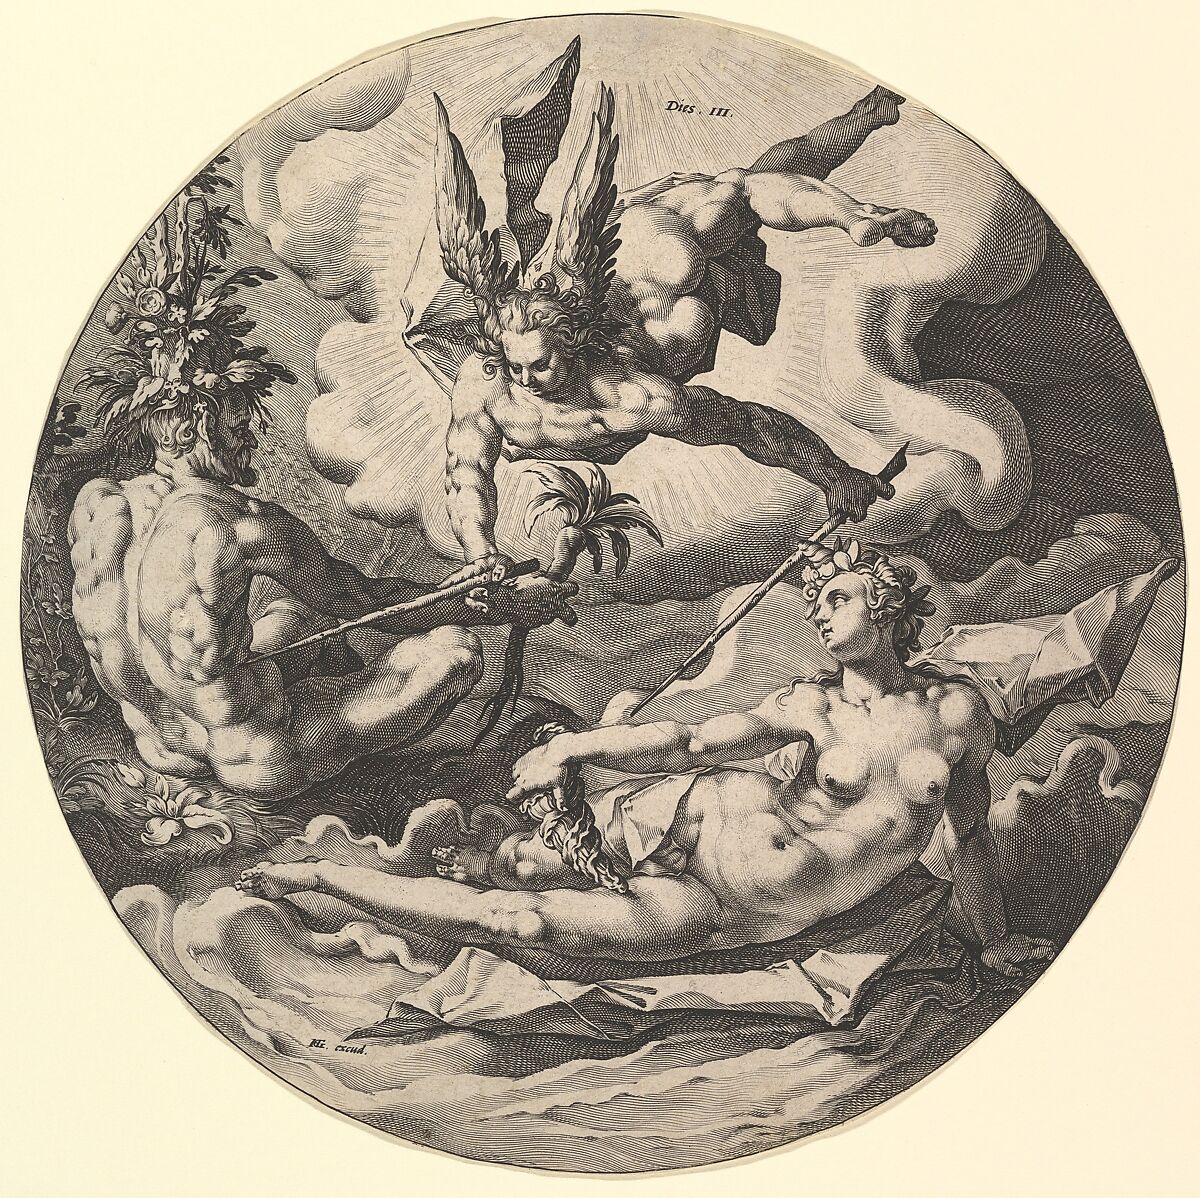 The Third Day ( Dies III): The Separation of Land and Sea, from "The Creation of the World", Jan Muller (Netherlandish, Amsterdam 1571–1628 Amsterdam), Engraving; Holl's second state of two 